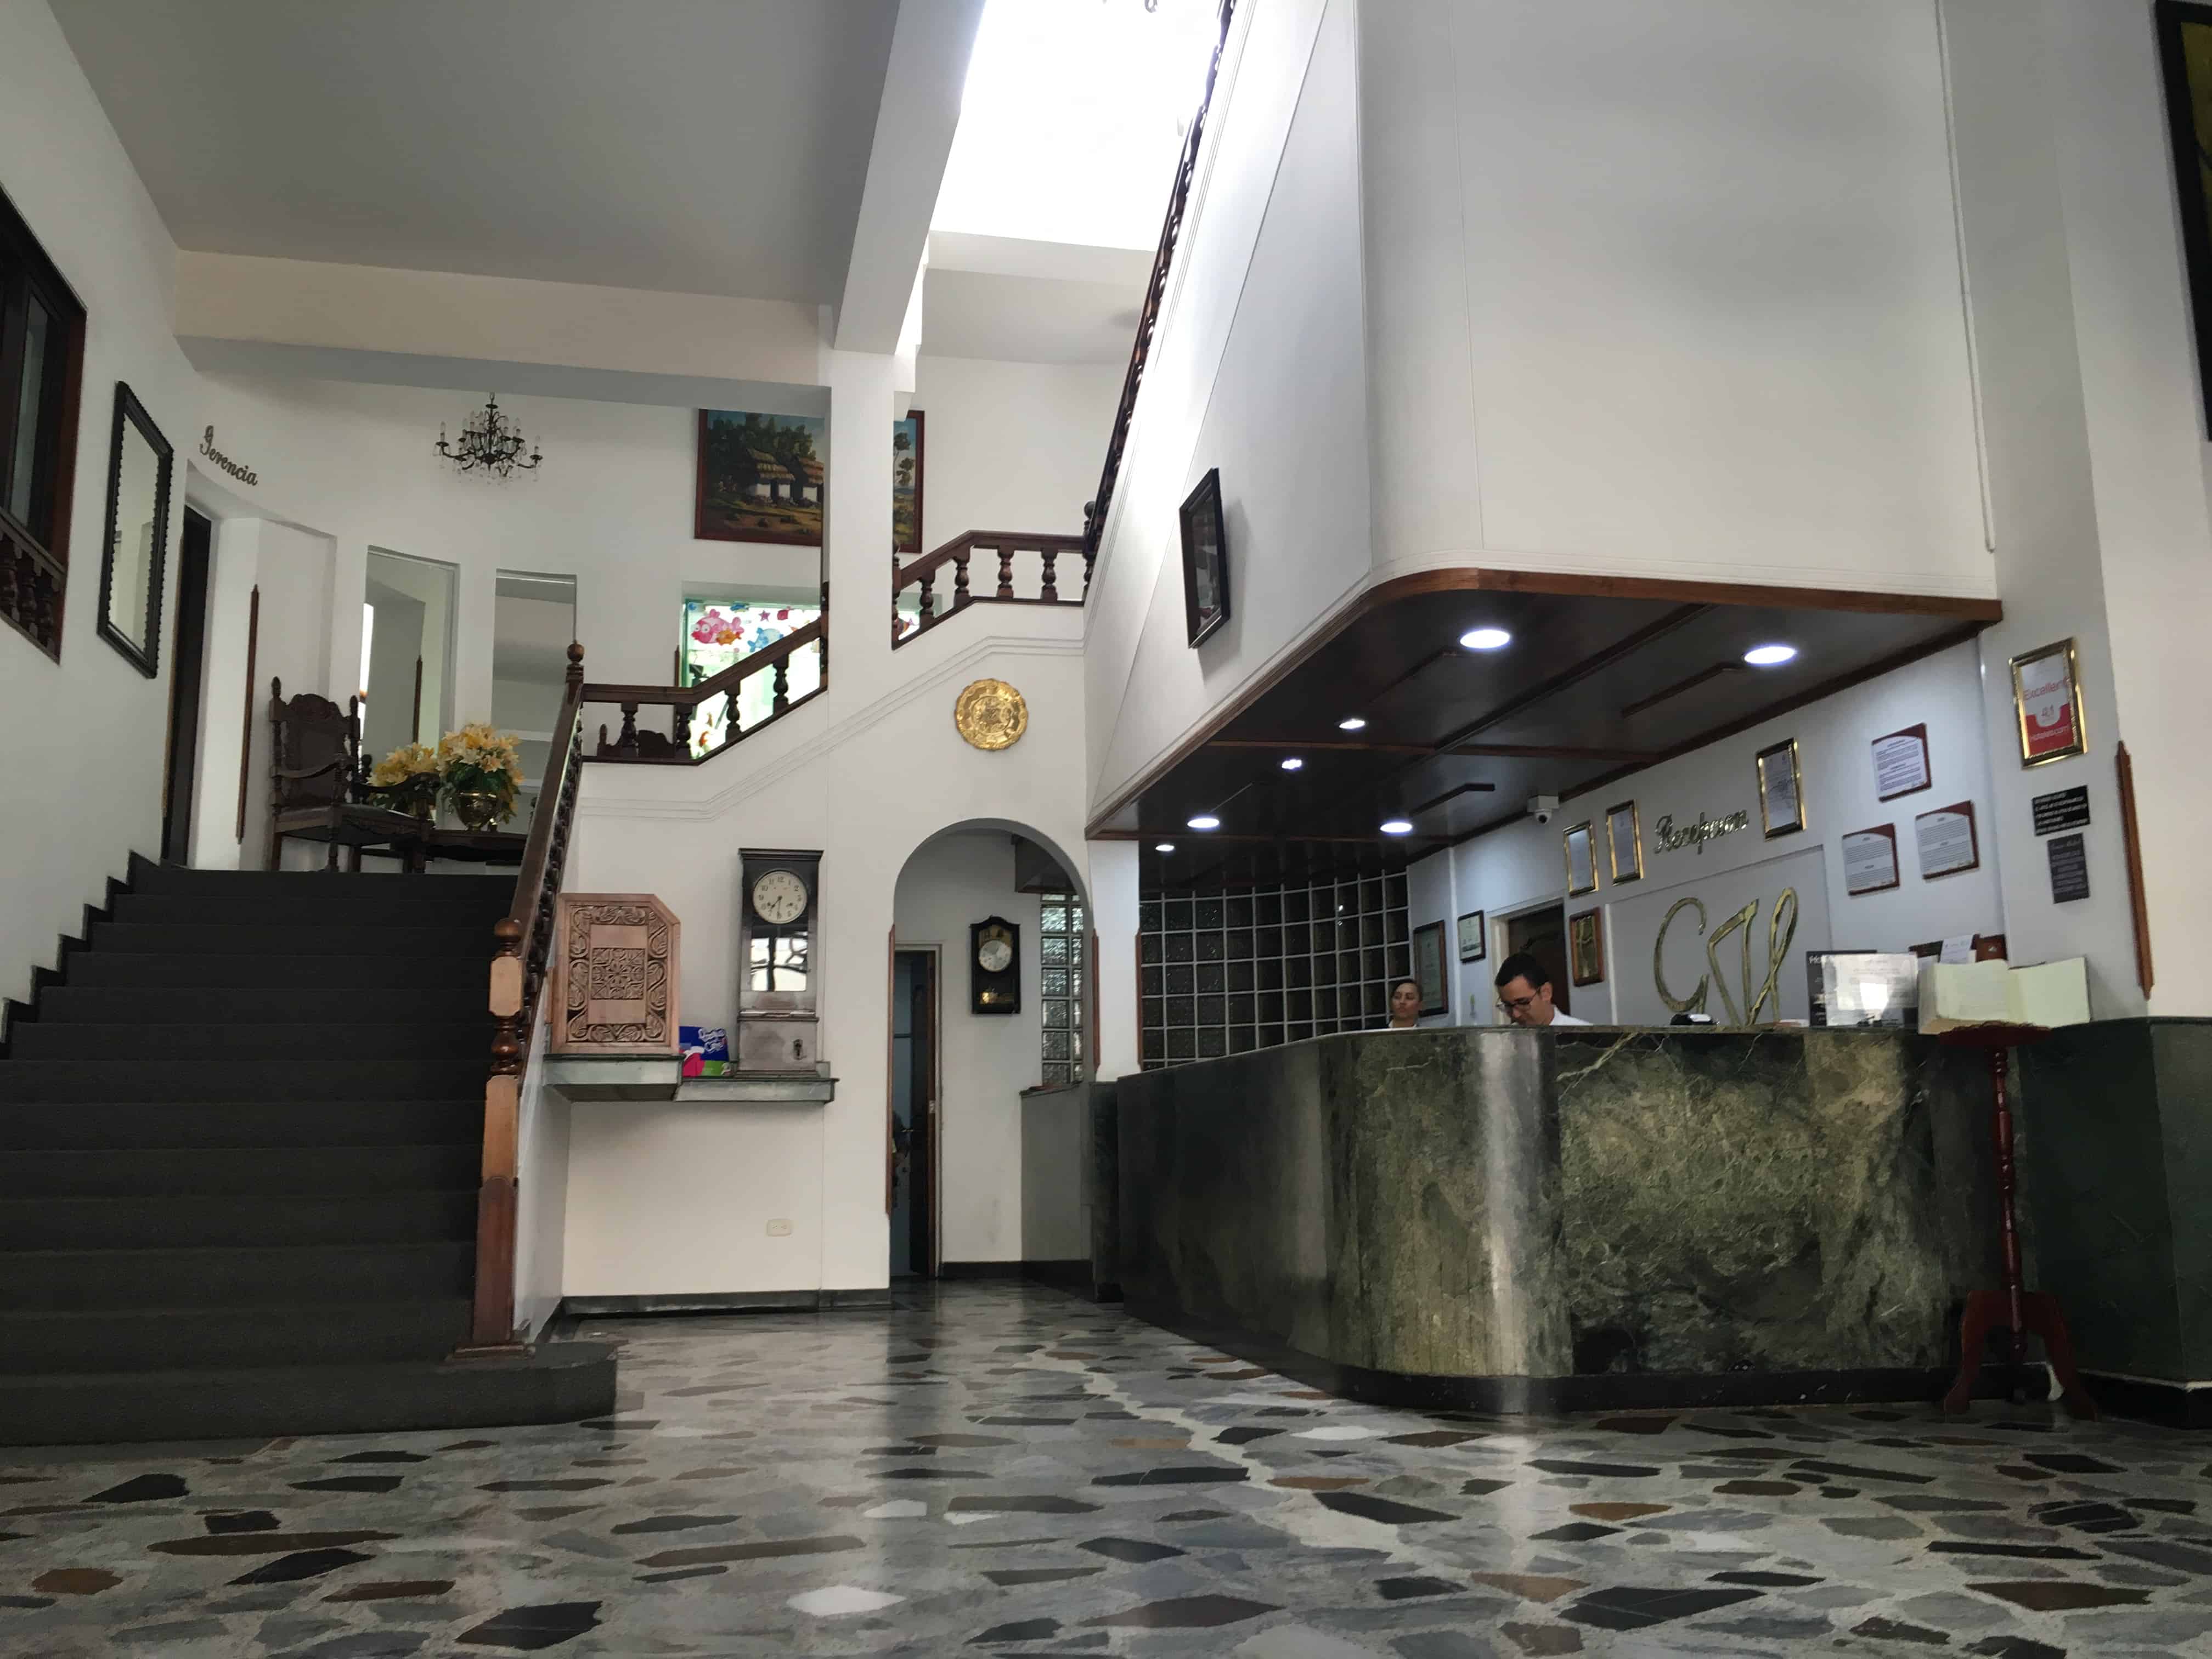 Lobby of the Gran Hotel Pereira, Colombia